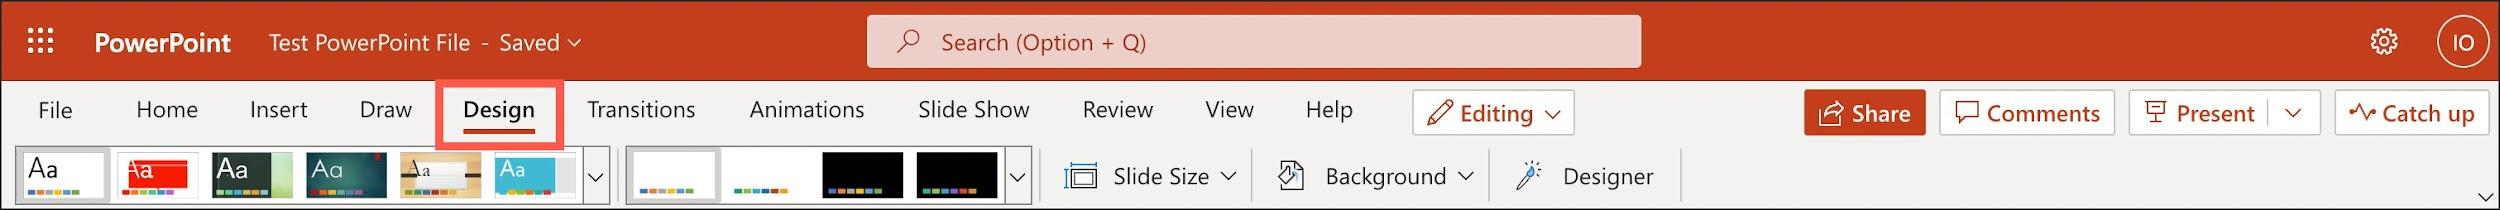 PowerPoint ribbon - Design tab highlighted